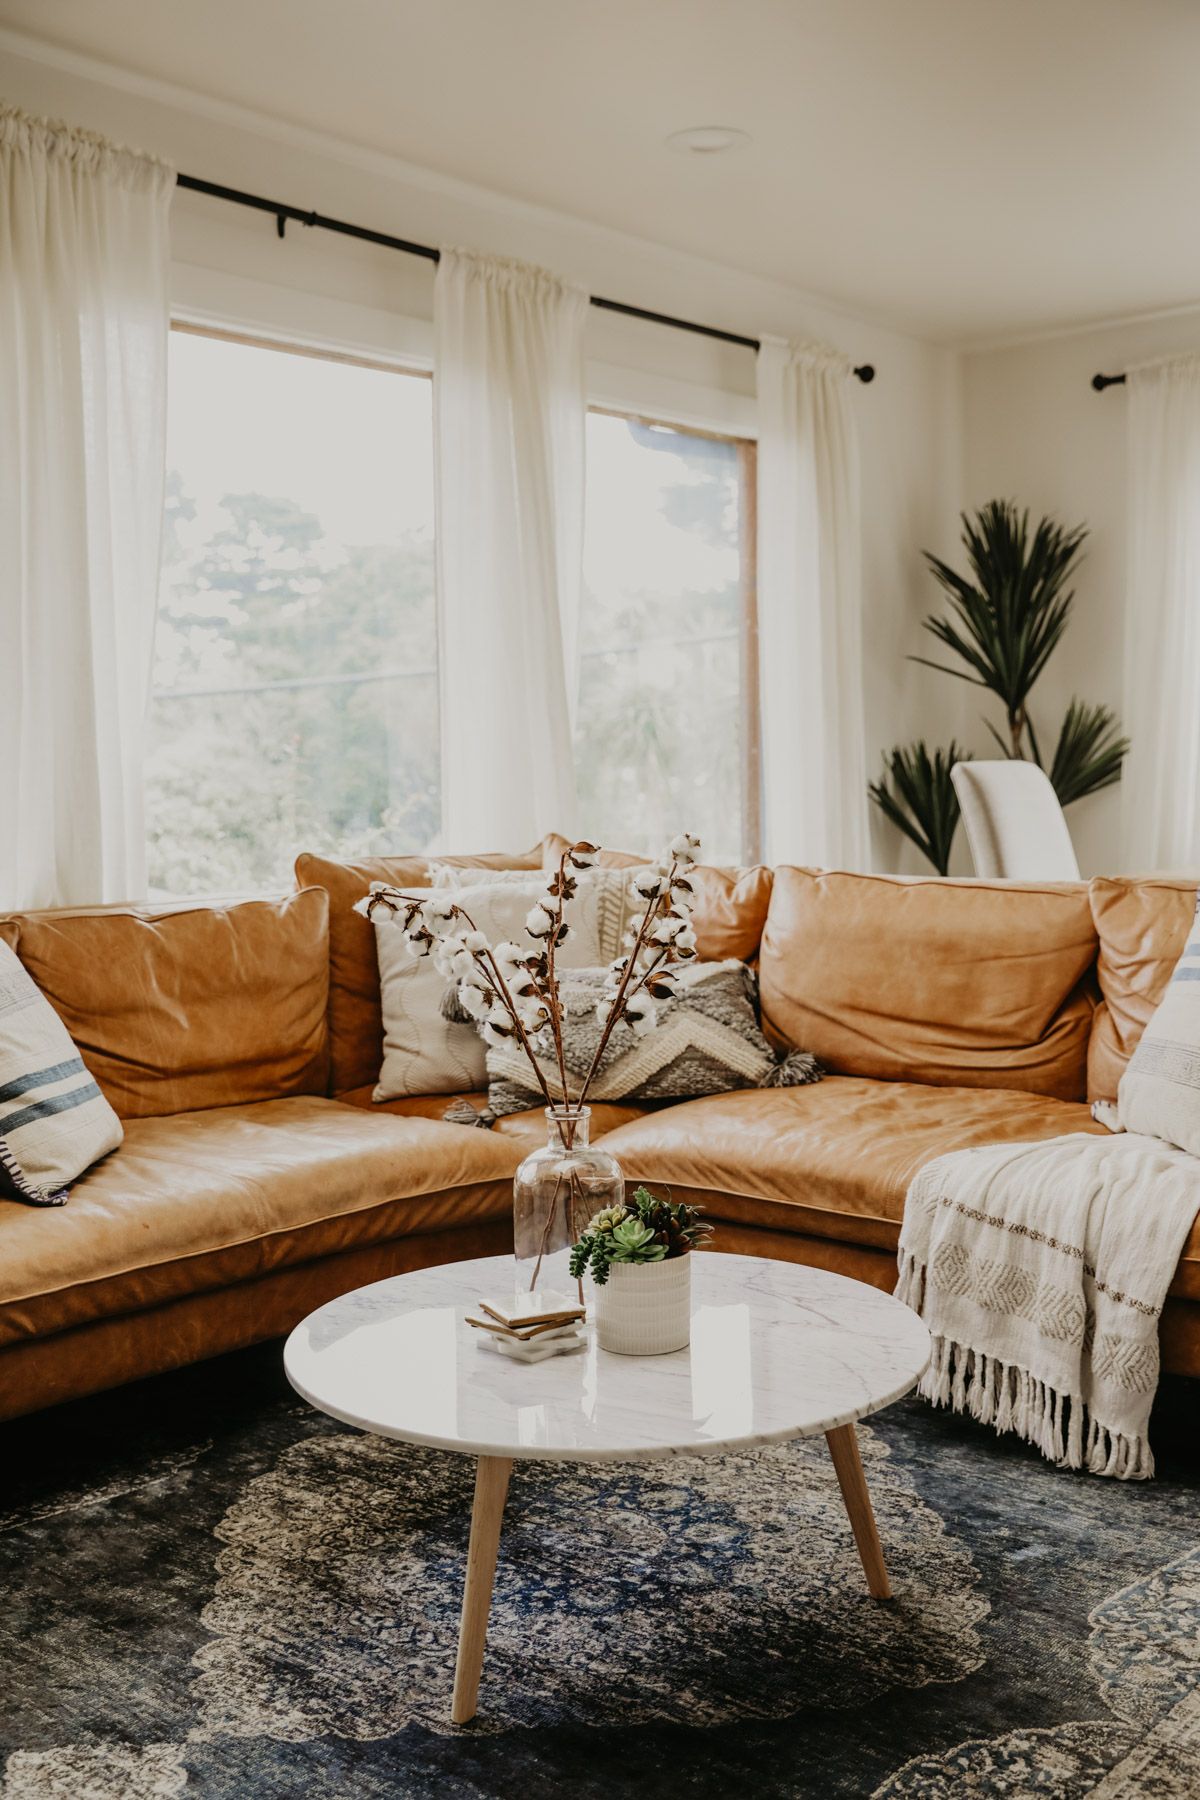 5 Ways to Get Yourself and Your Home Ready for Fall